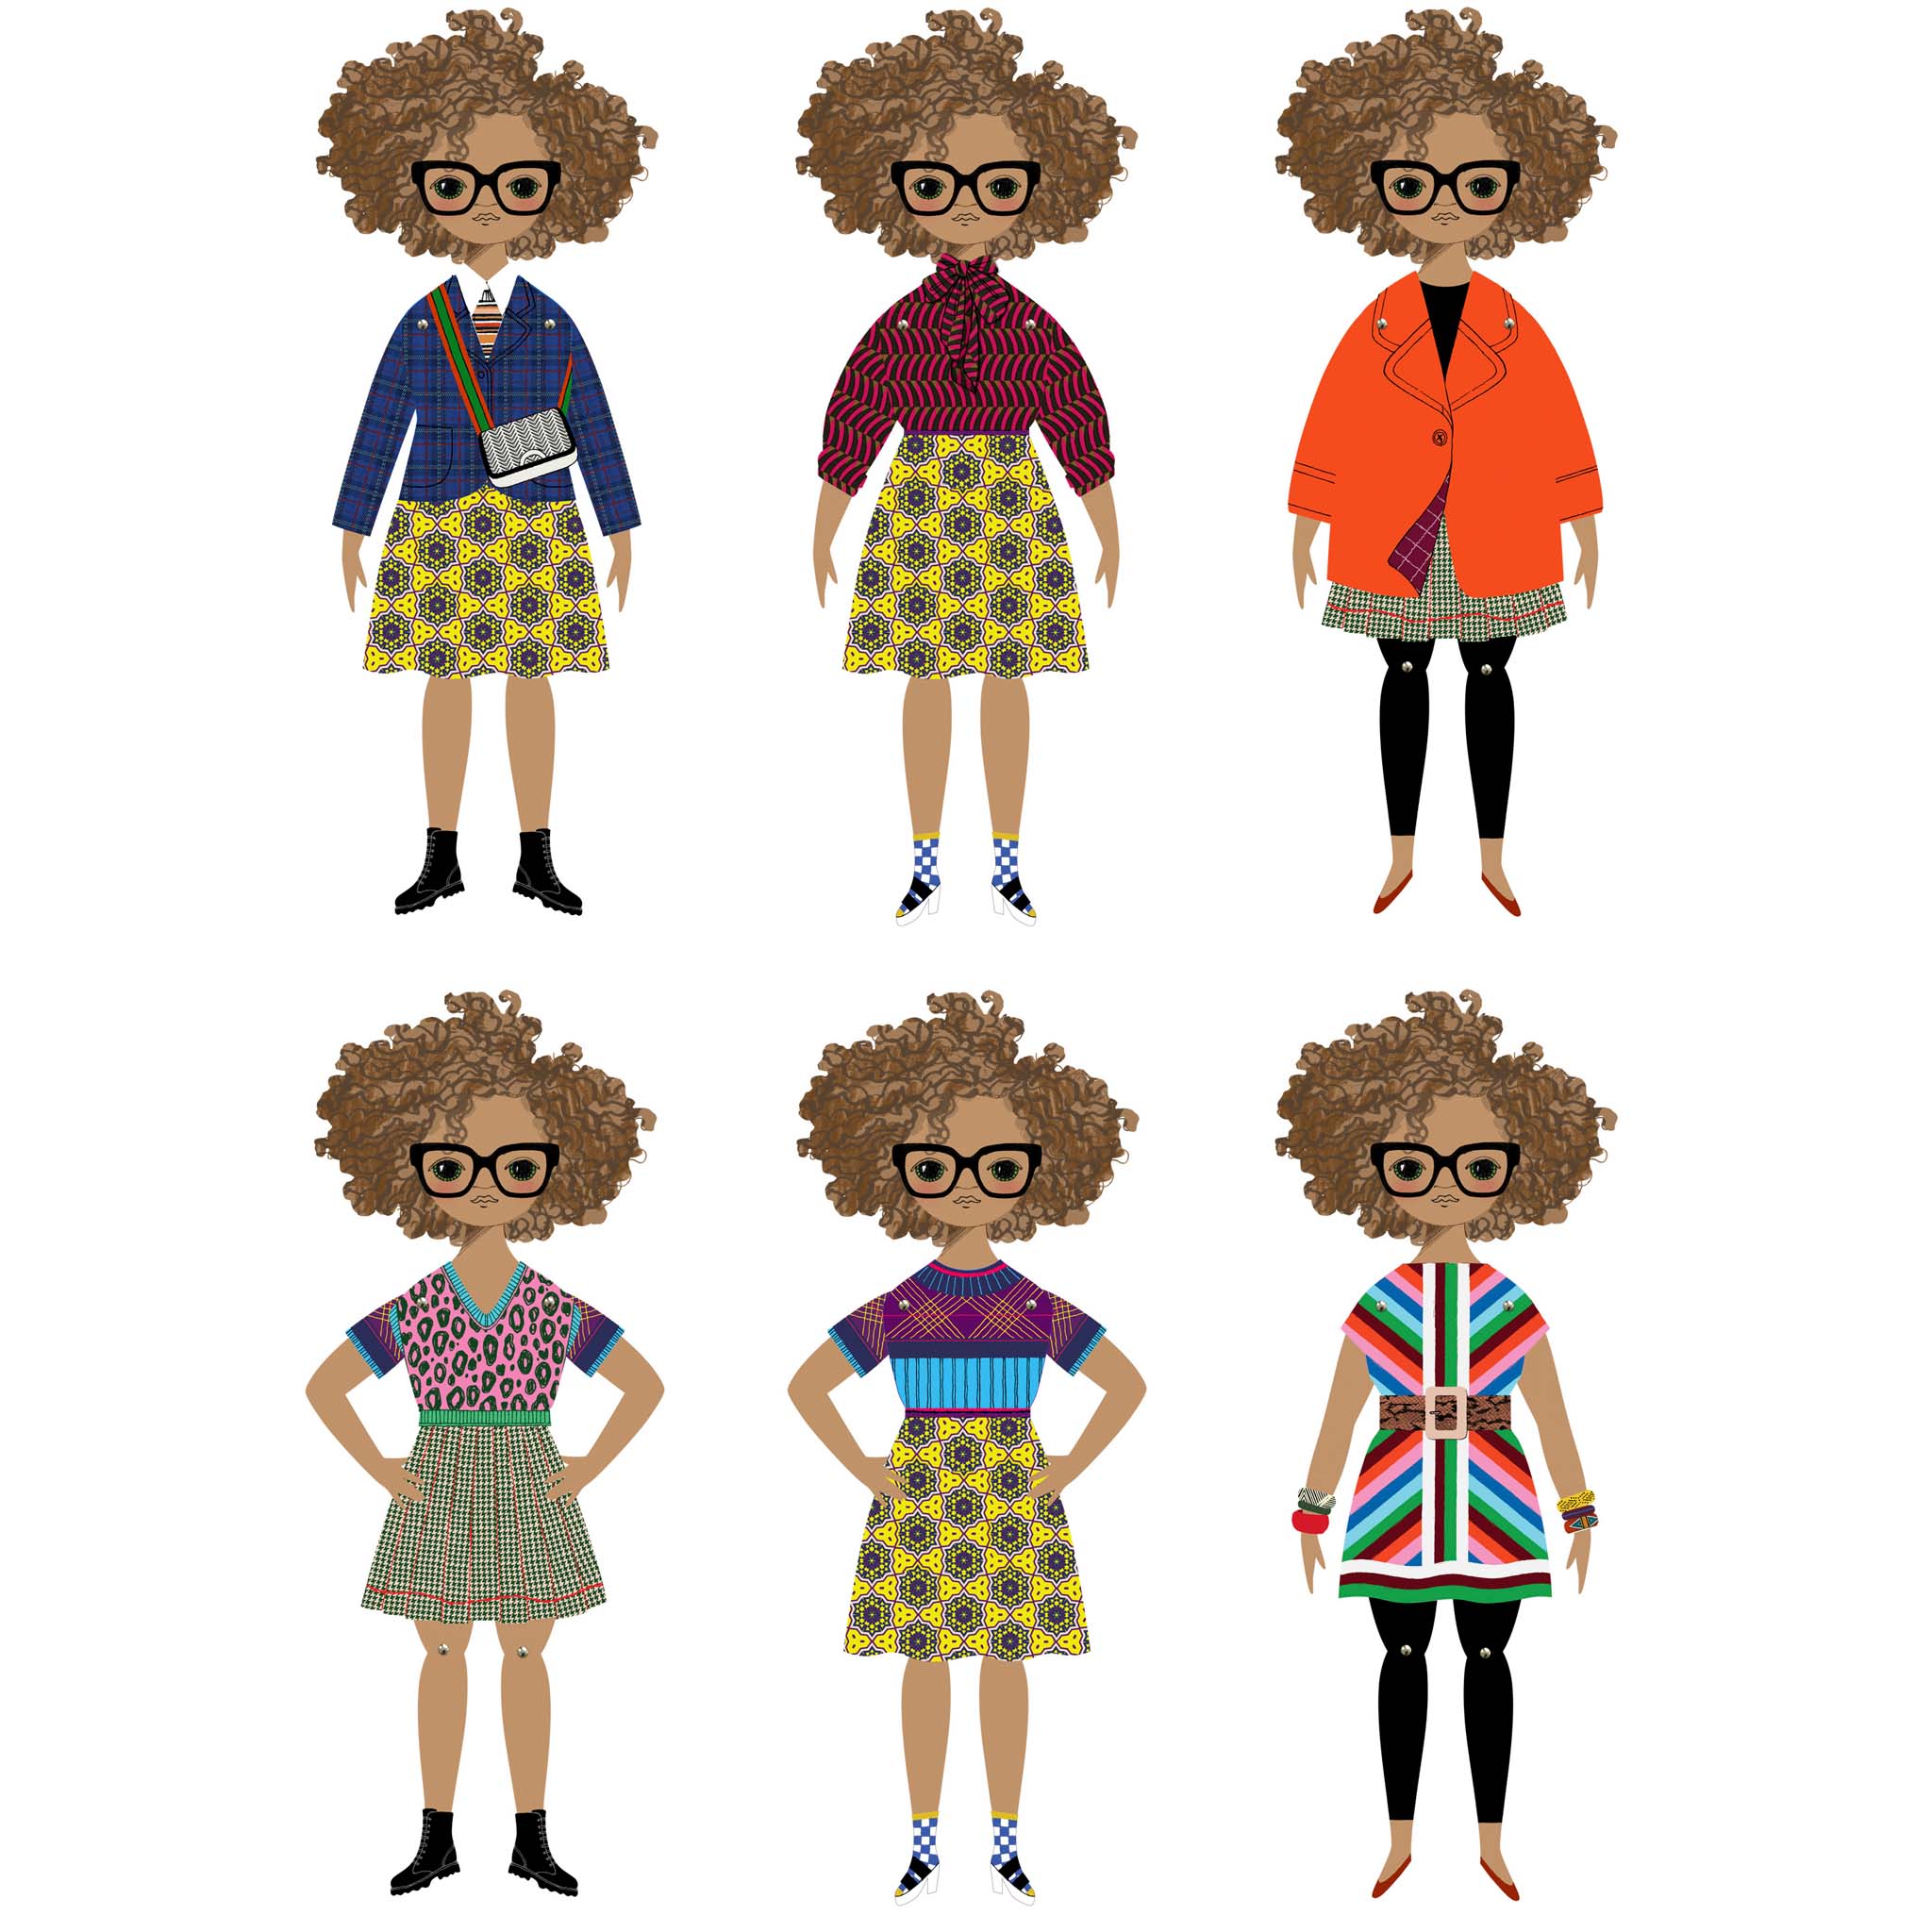 RUTH CARTER PAPER DOLL KIT